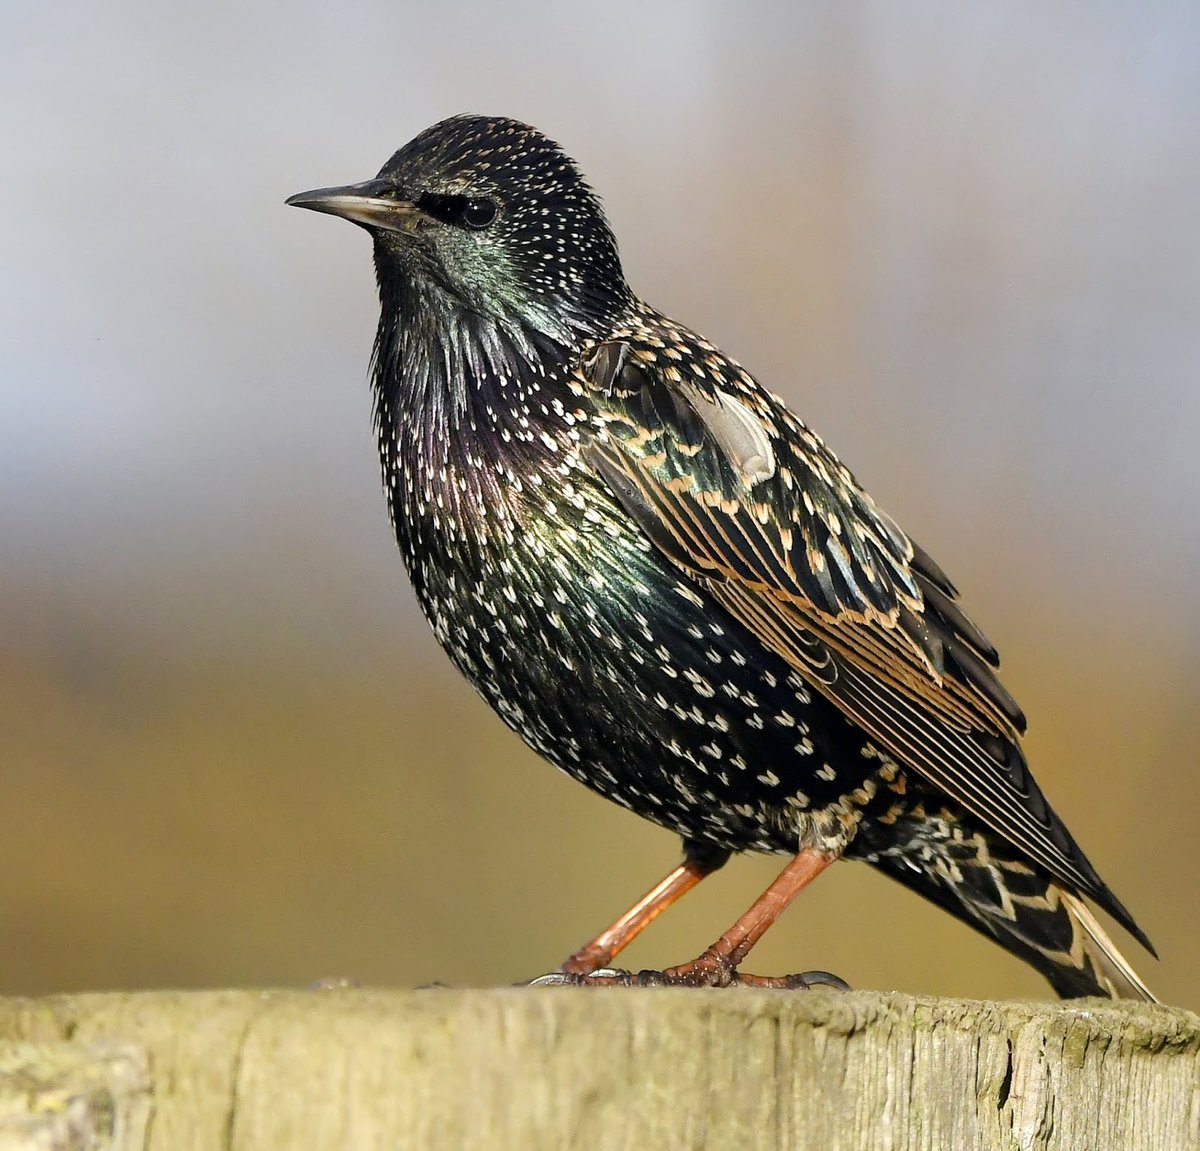 Starling Often arriving in gardens in noisy bickering groups, like a gang of rowdy avian teenagers, they hoover up fat & seed mix like miniature feathered vacuum cleaners!Superficially black birds, they're actually quite colourful in good light. #SelfIsolationBirdWatch 